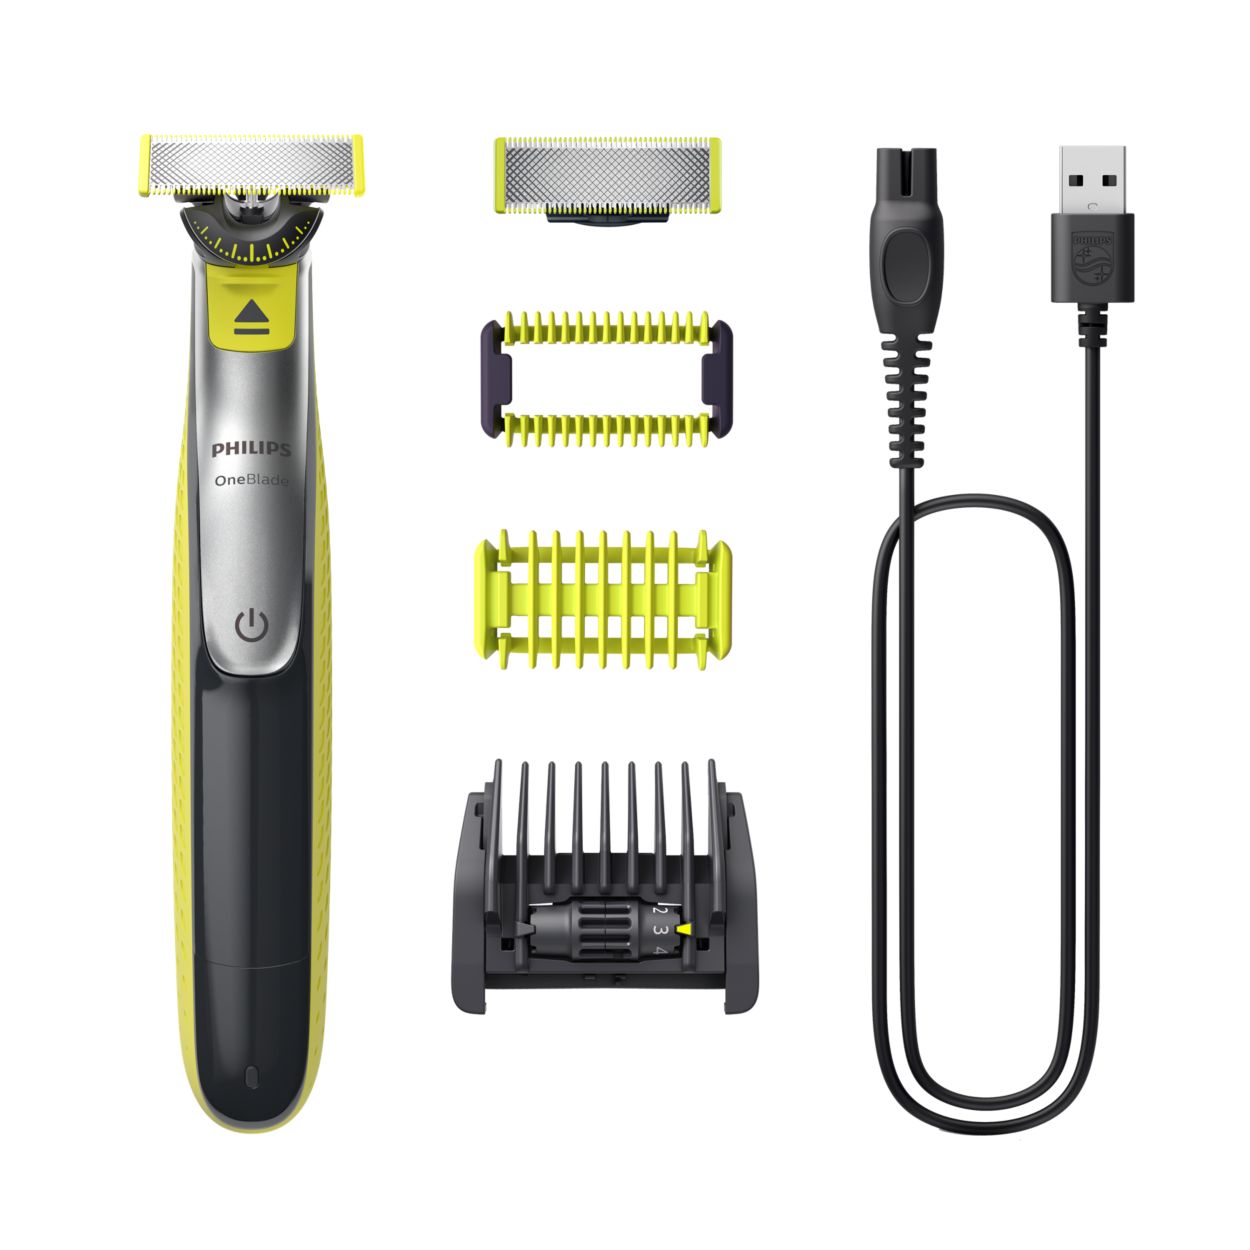 Flexible 5-in-1 shaver and trimmer for face and body